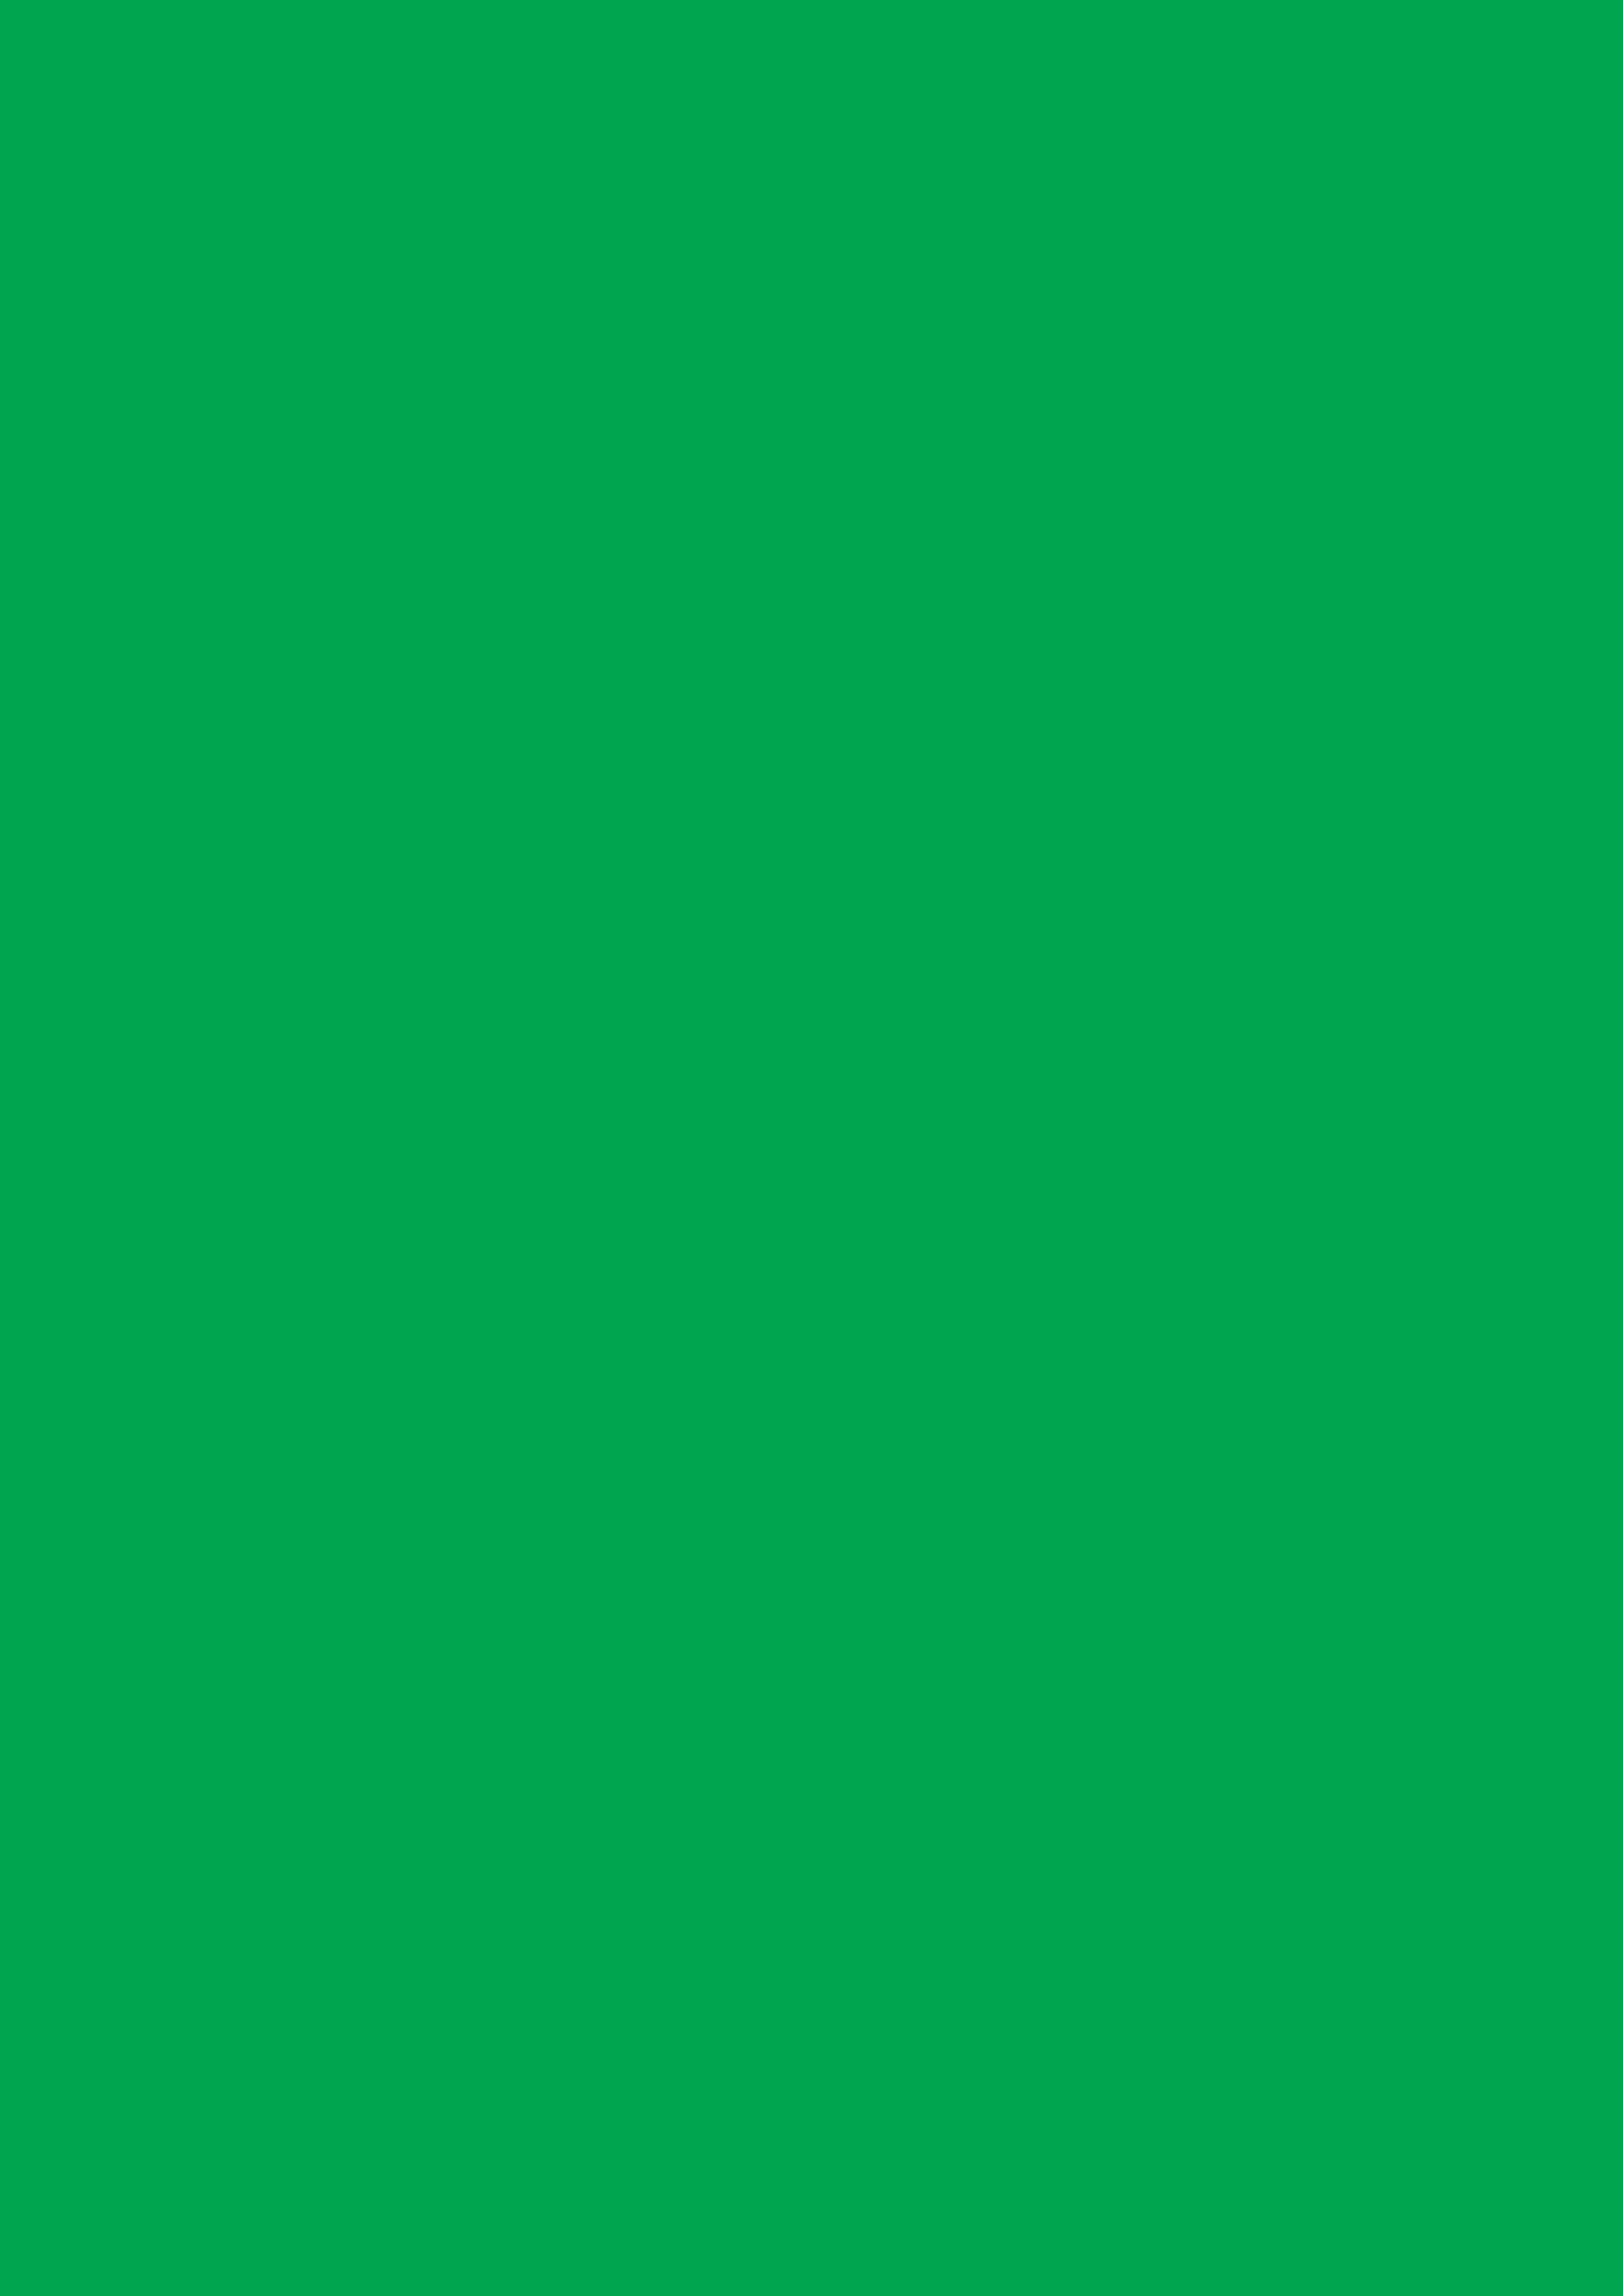 2480x3508 Green Pigment Solid Color Background